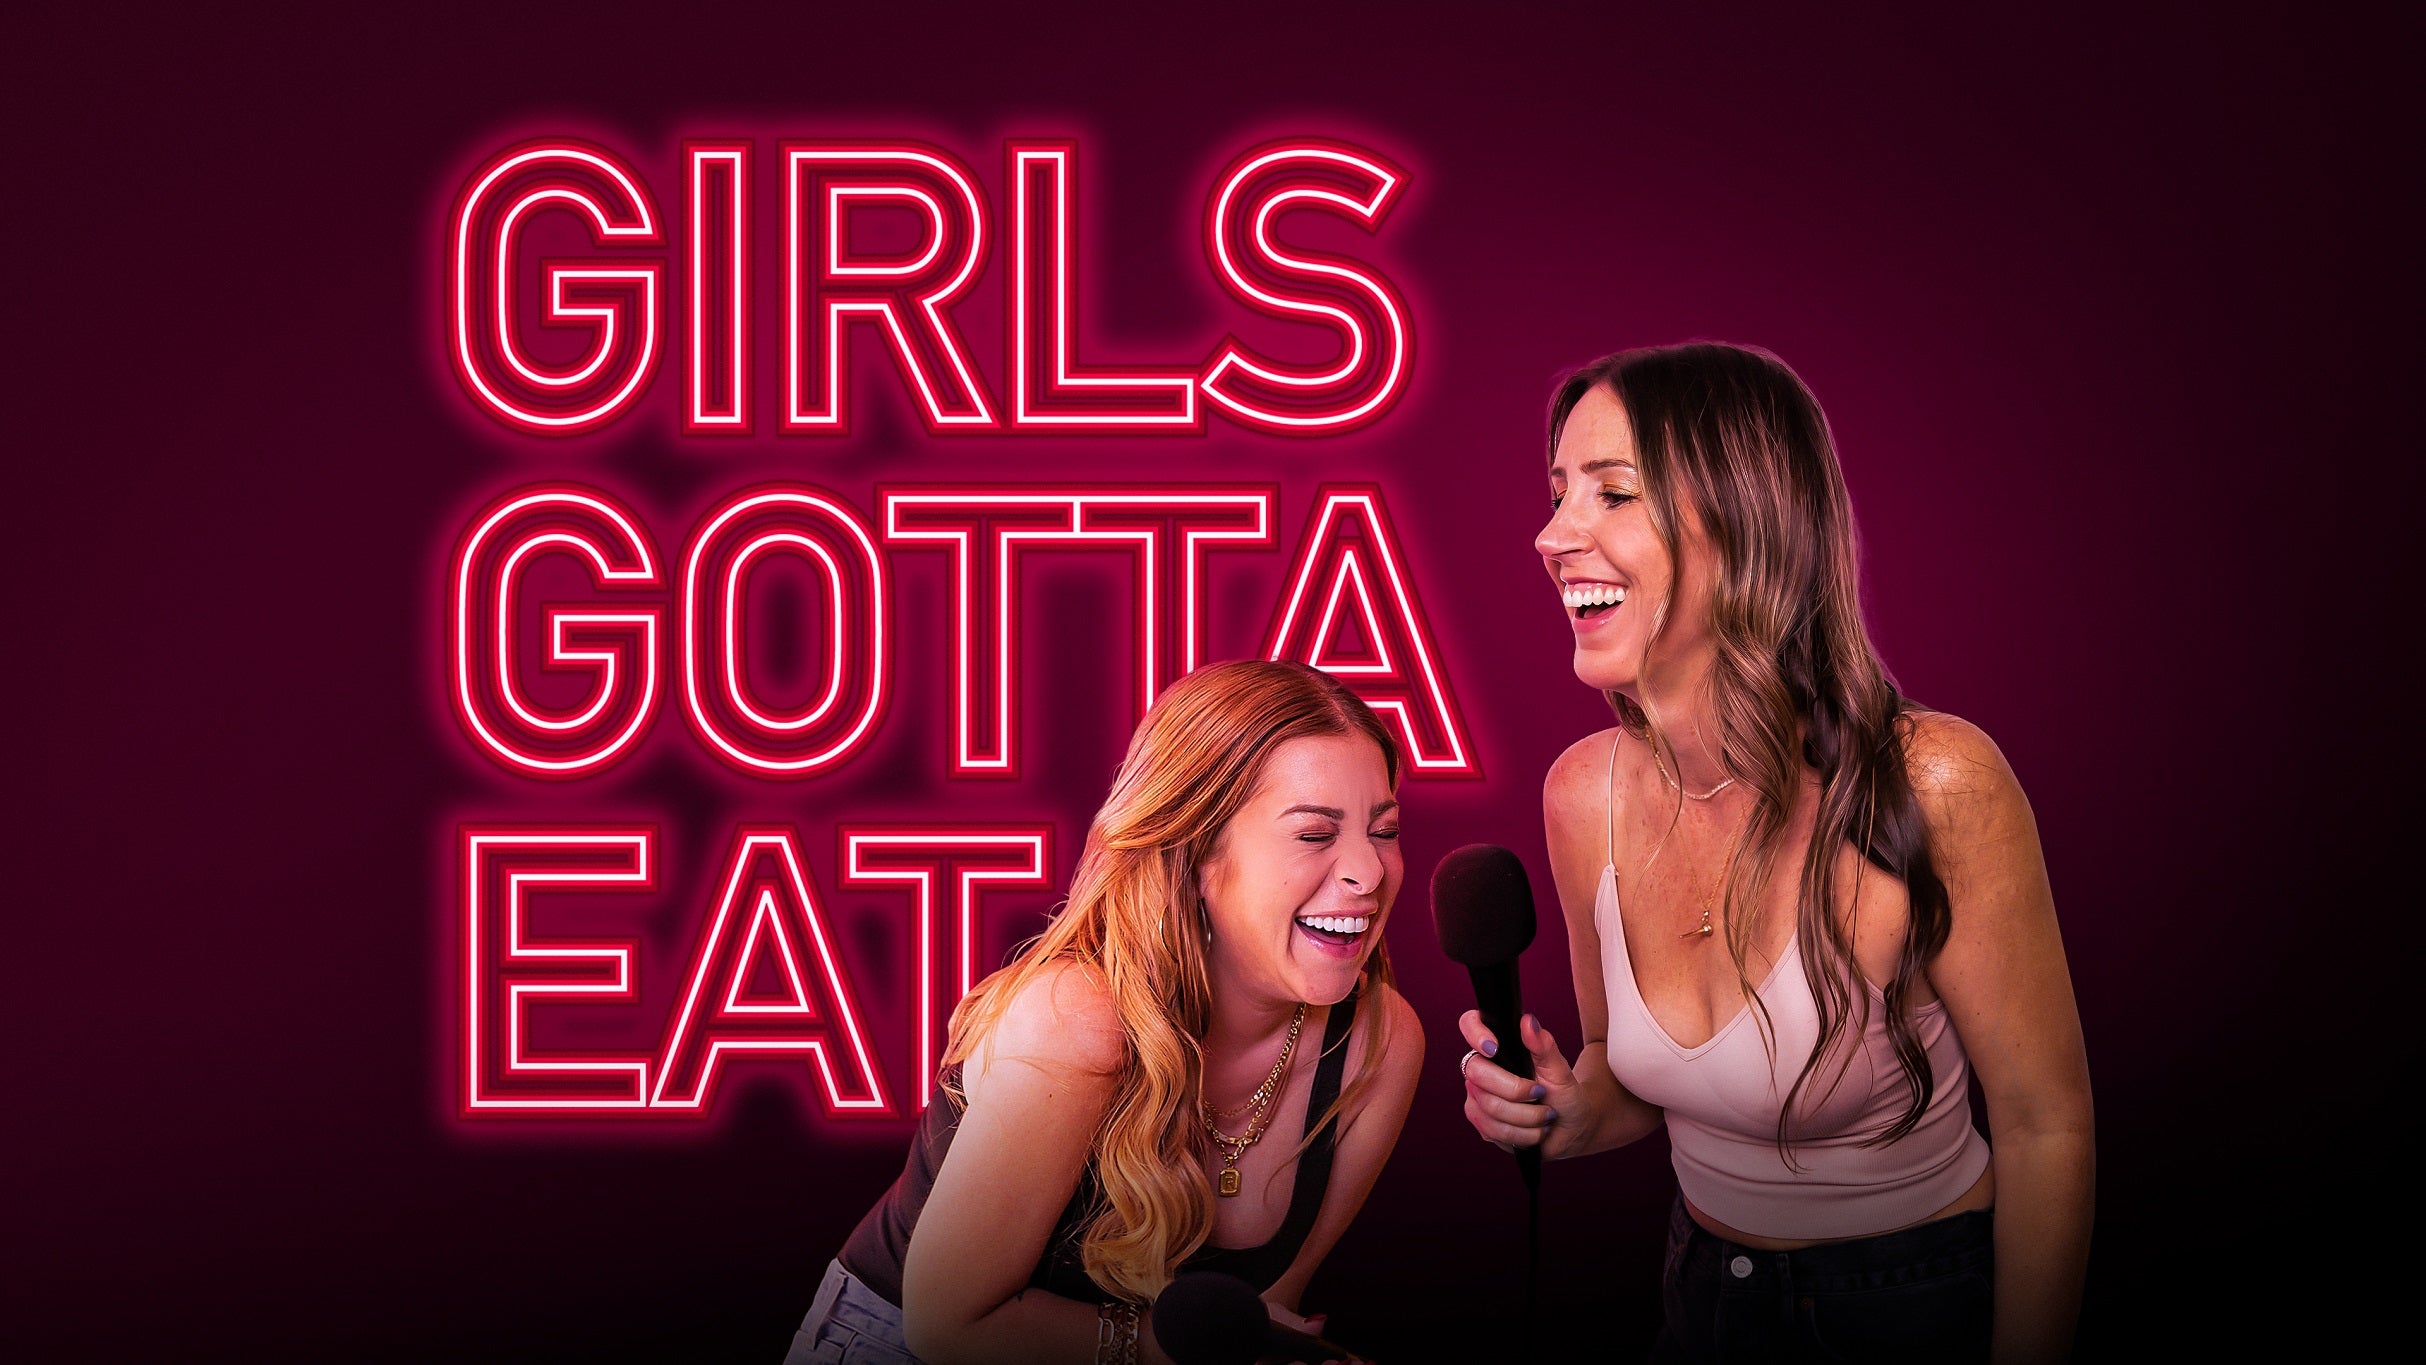 Girls Gotta Eat: Snack City Tour at The Theatre at Ace Hotel - Los Angeles, CA 90015